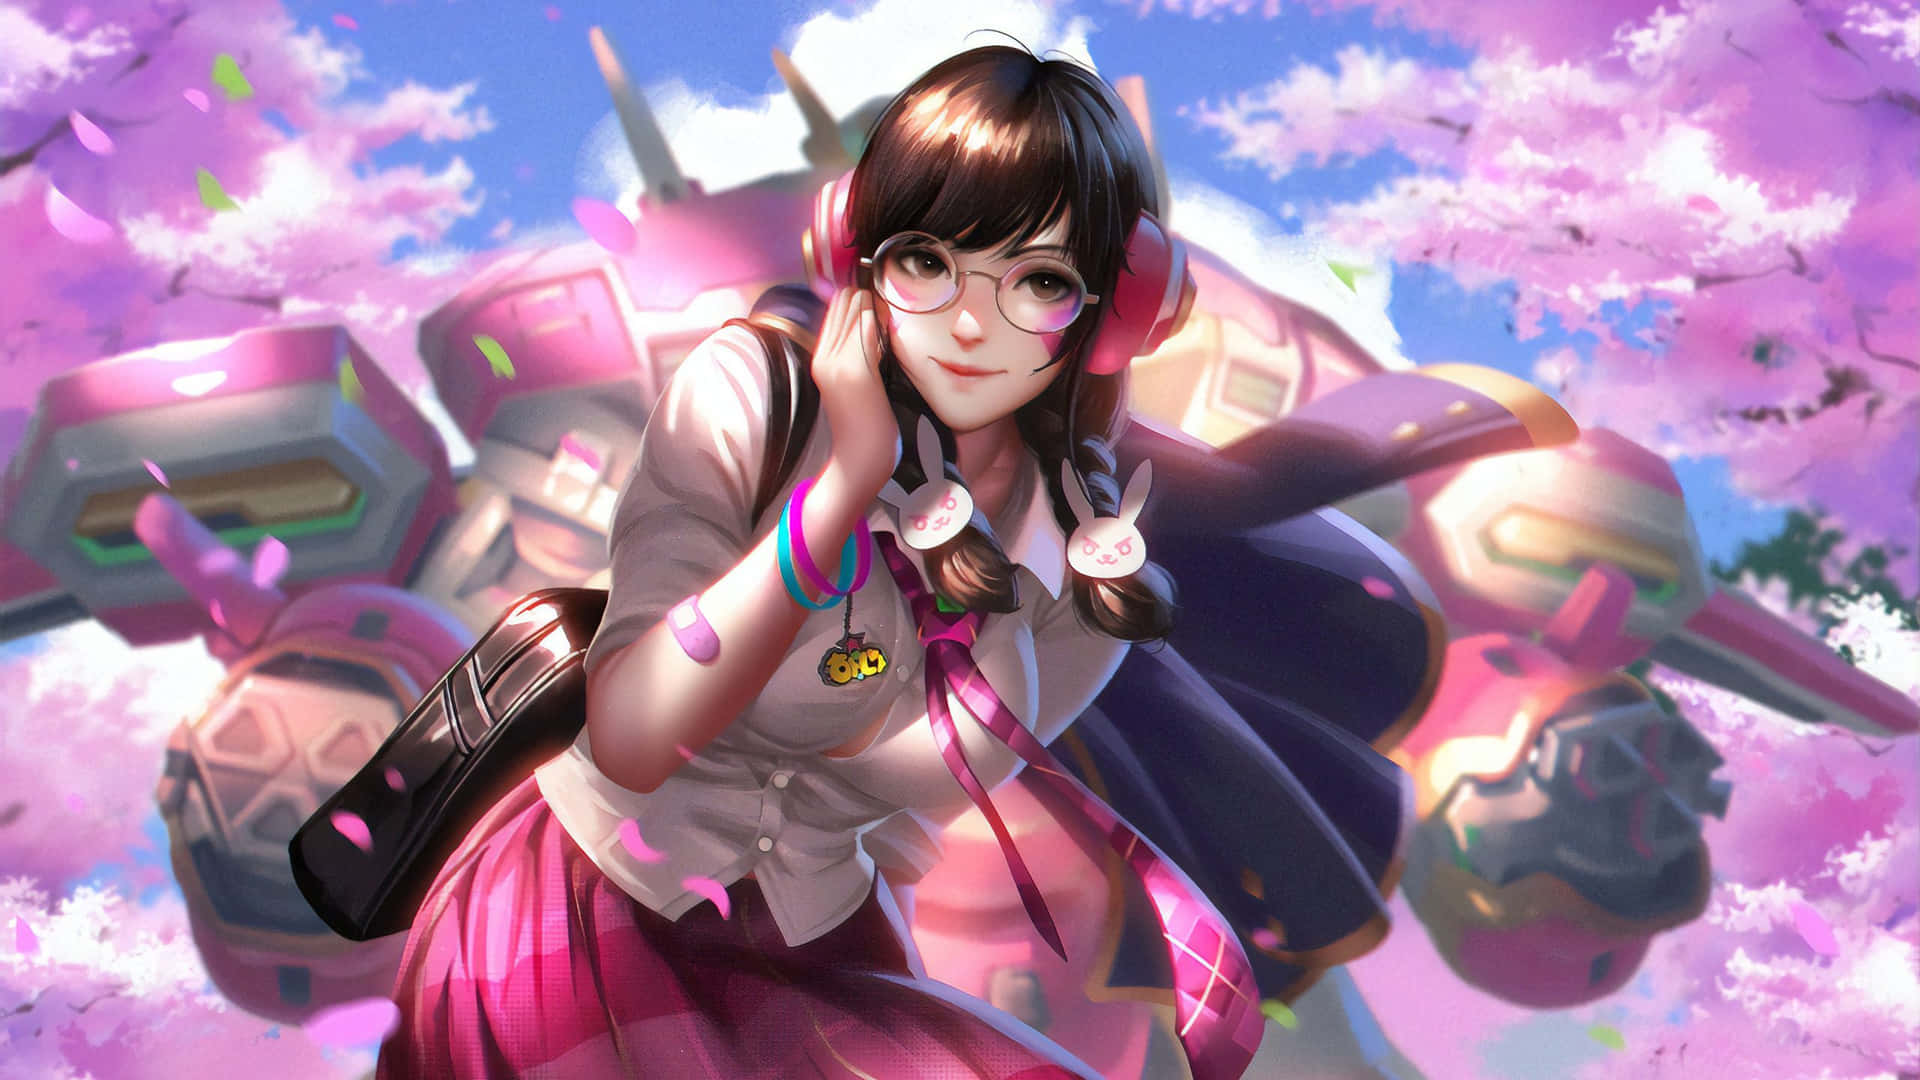 100+] Dva Overwatch Wallpapers for FREE 